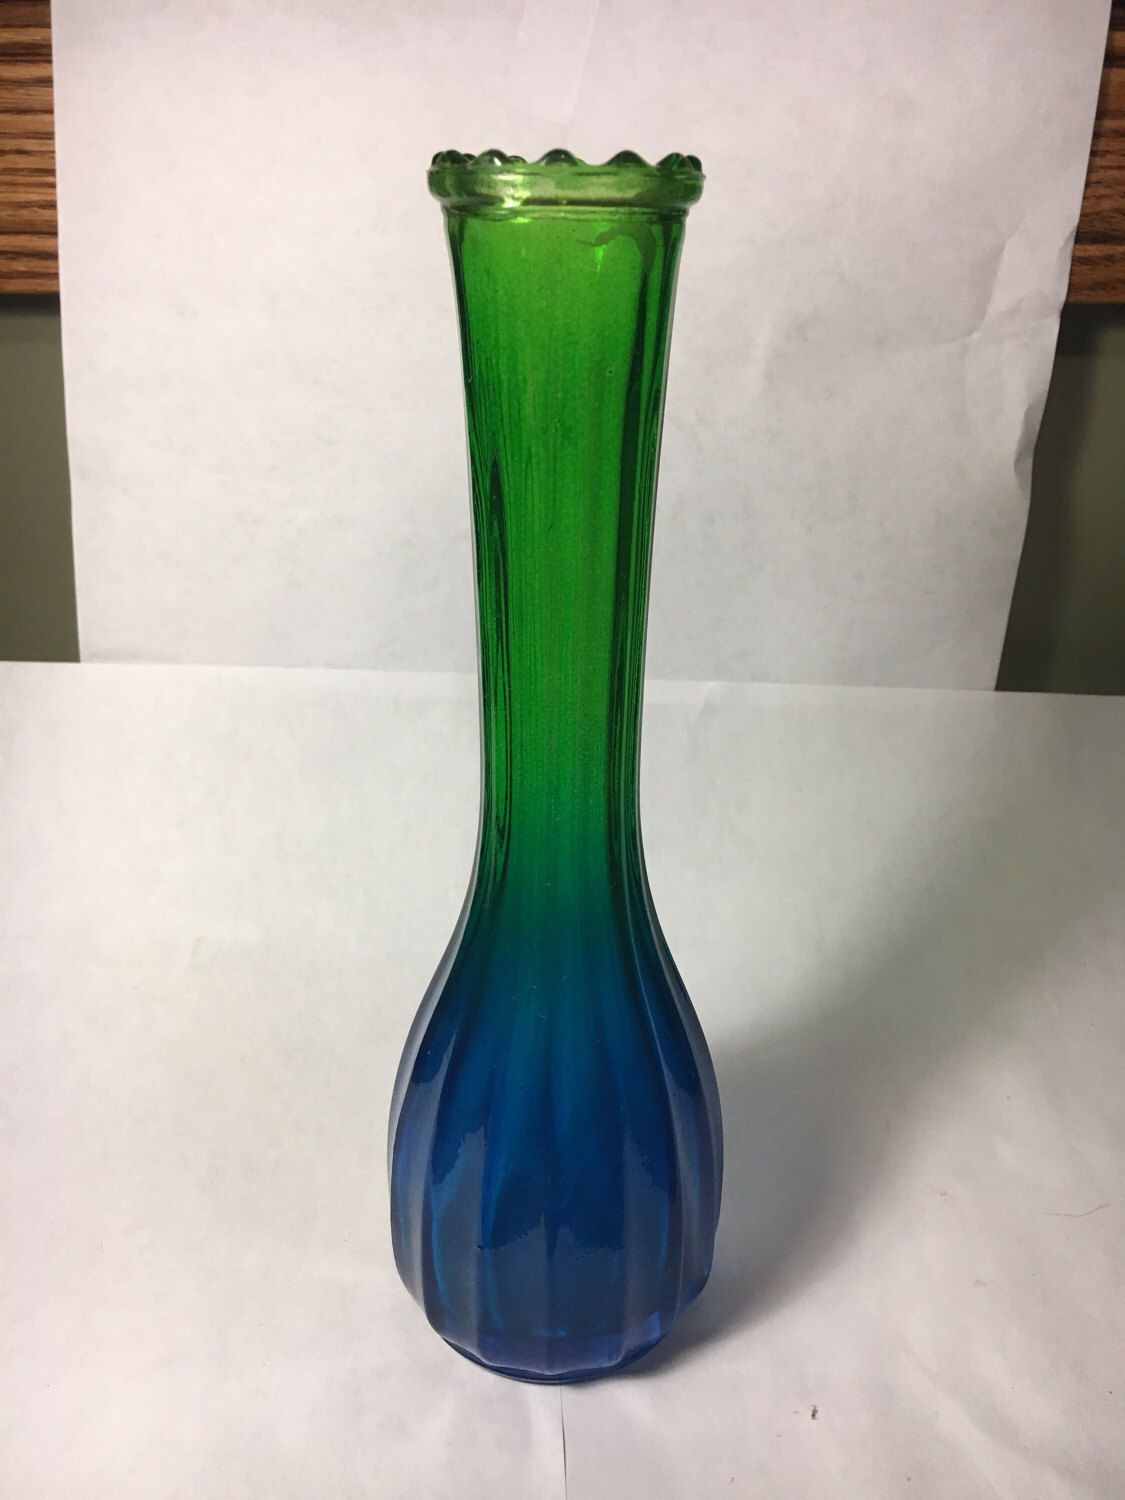 10 Fashionable Daum Glass Vase 2024 free download daum glass vase of collectible glass vases collection a personal favorite from my etsy throughout collectible glass vases collection a personal favorite from my etsy shop of collectible glas